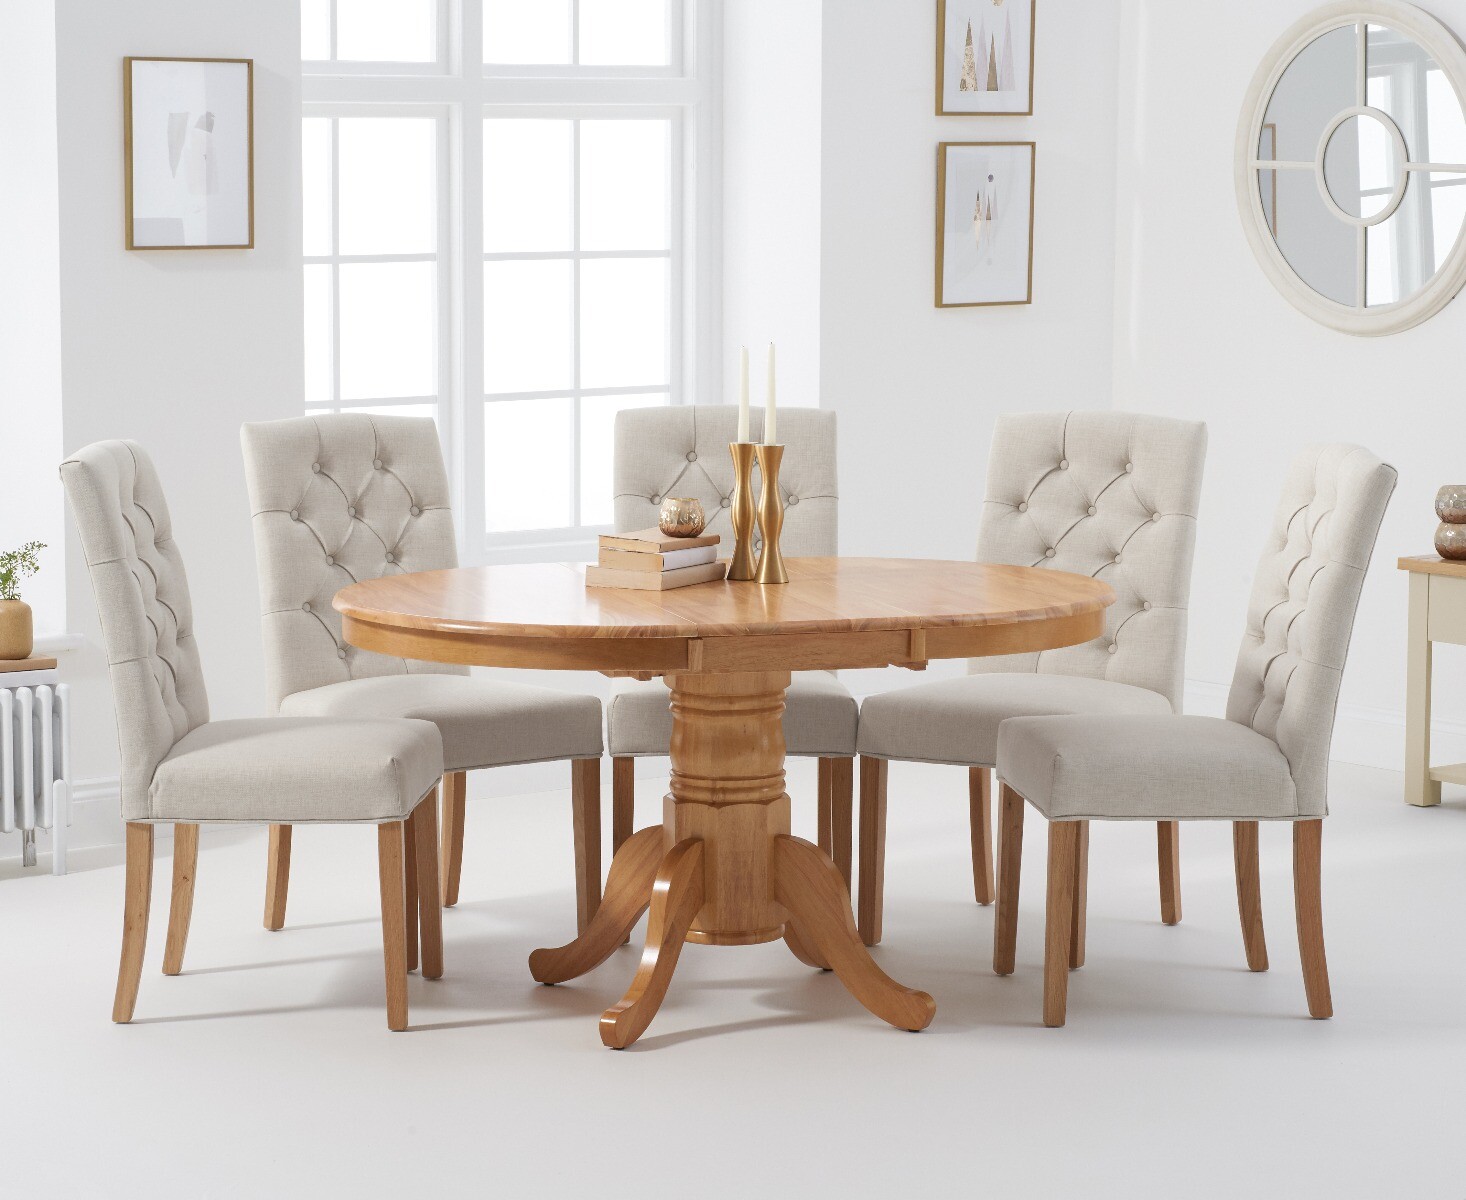 Photo 1 of Extending epsom oak pedestal table with 4 natural isabella chairs